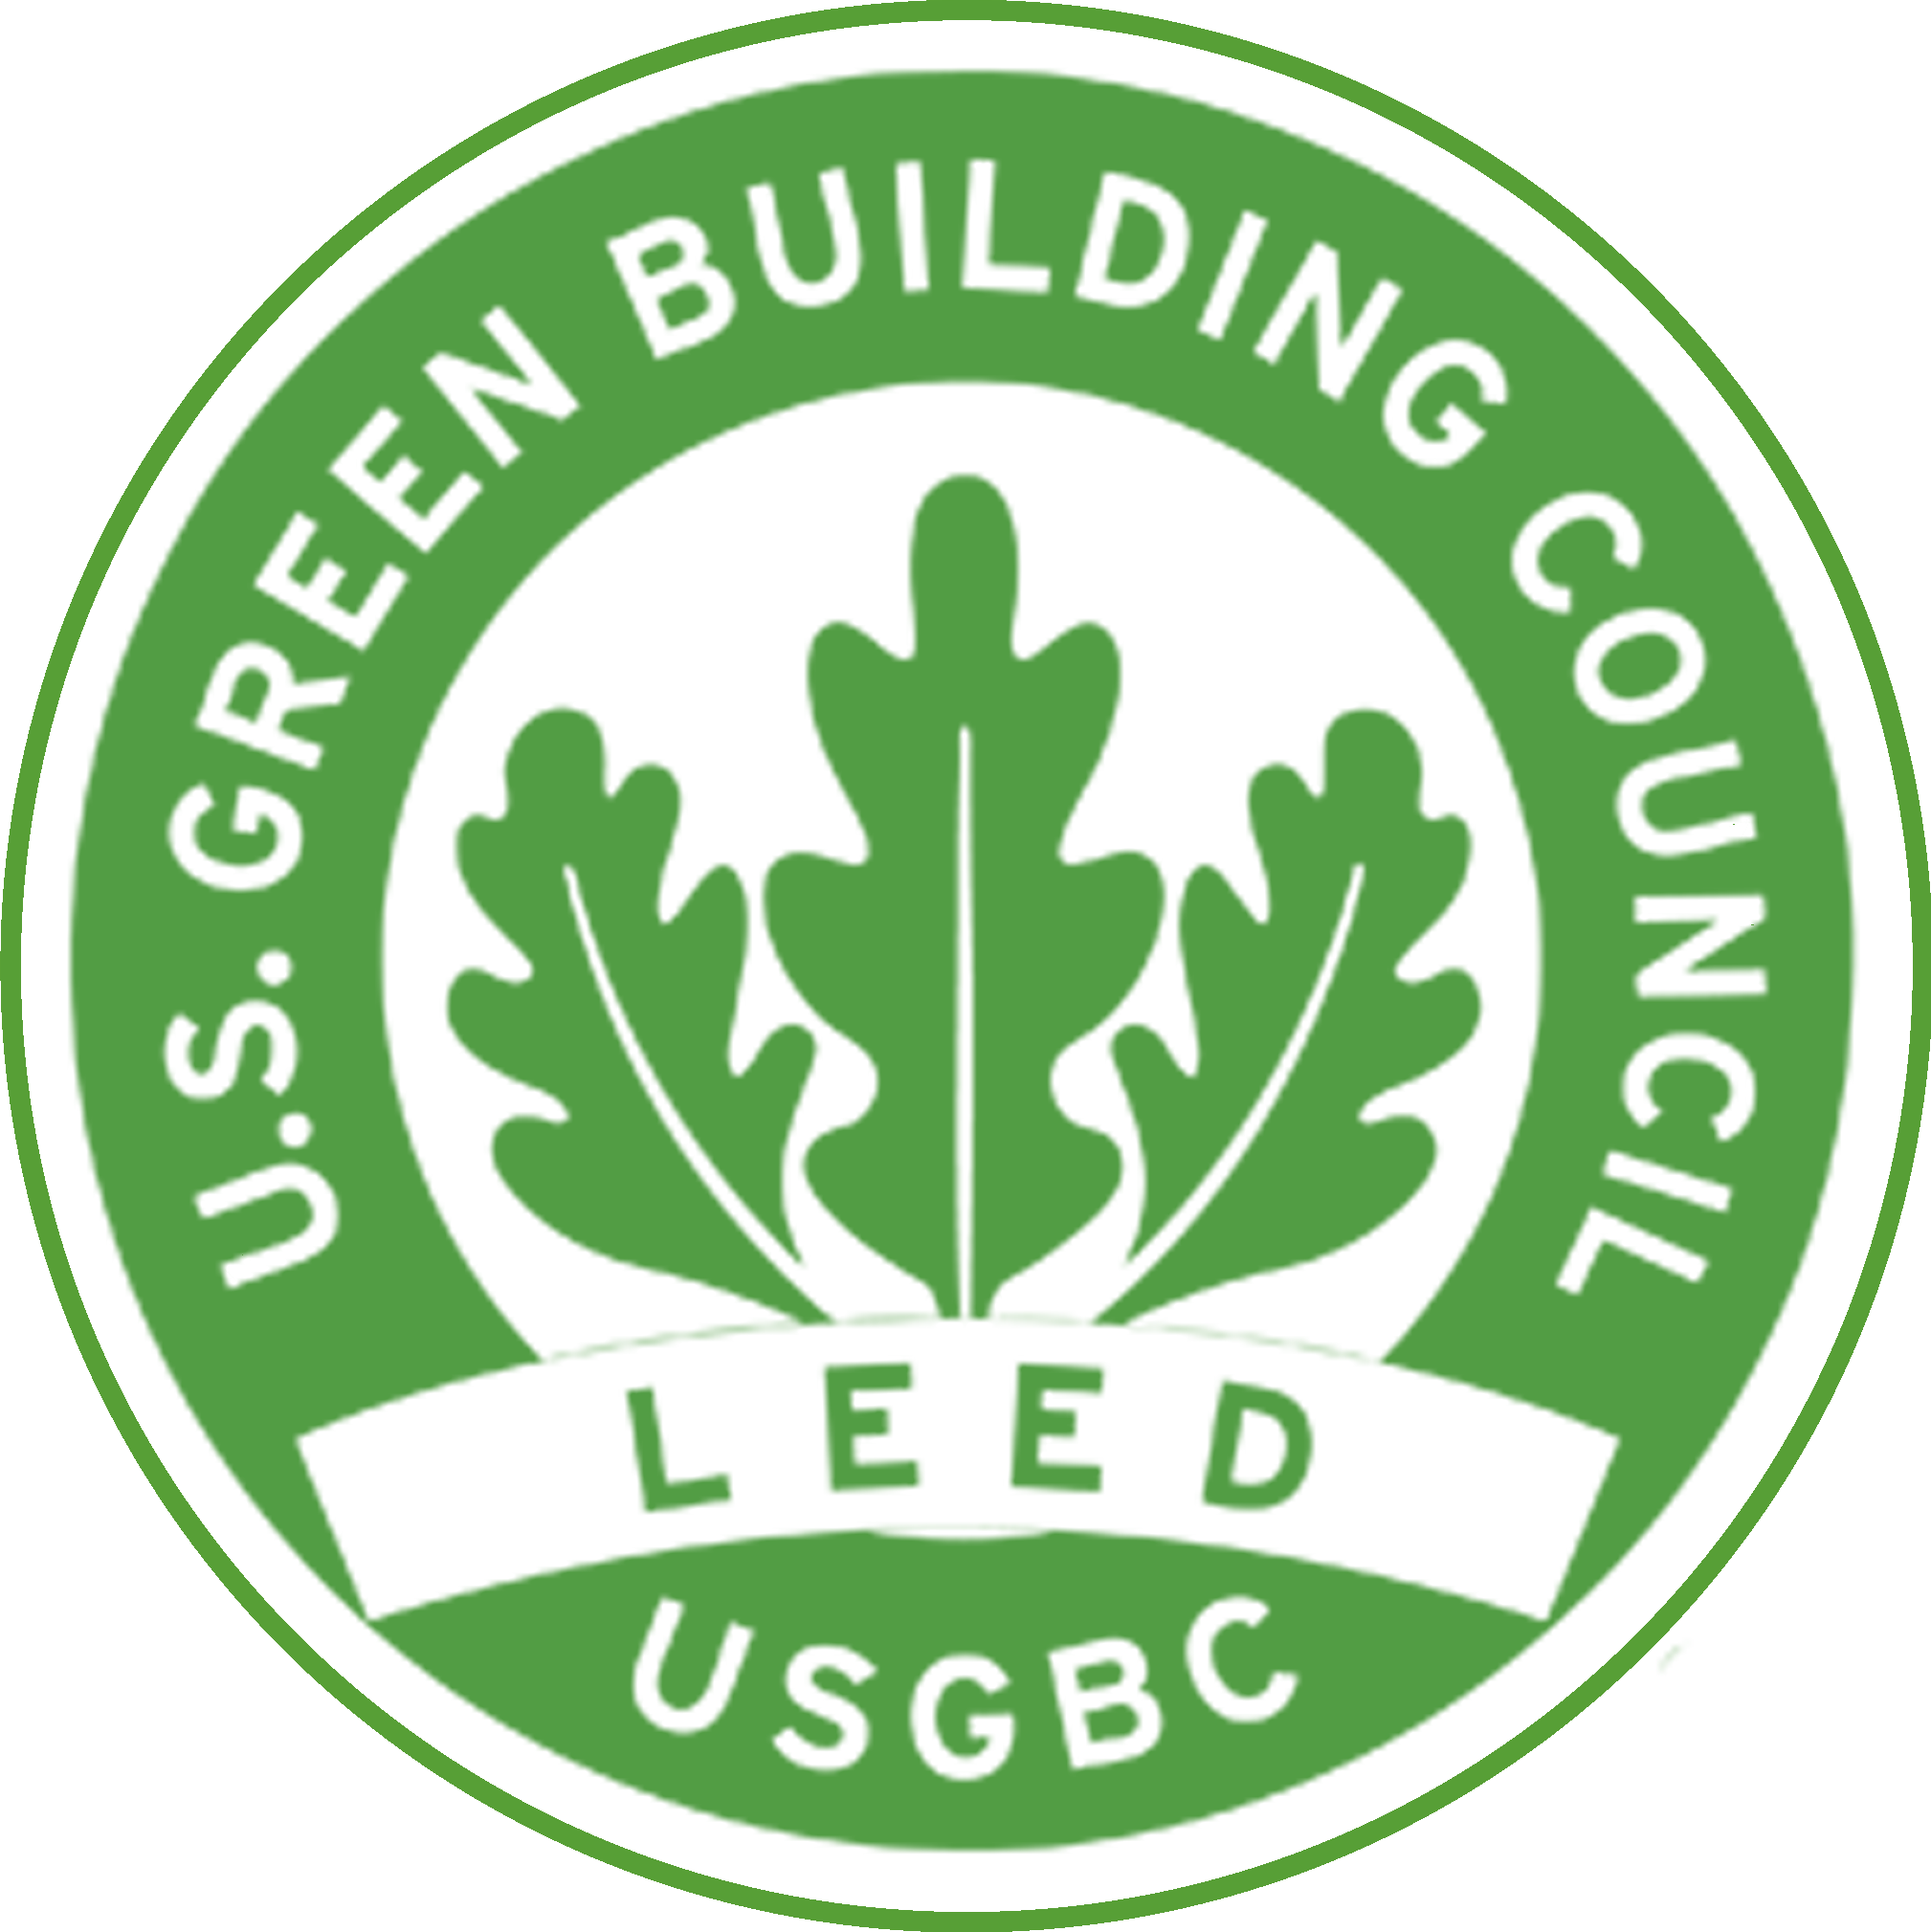 LEED for SIPs